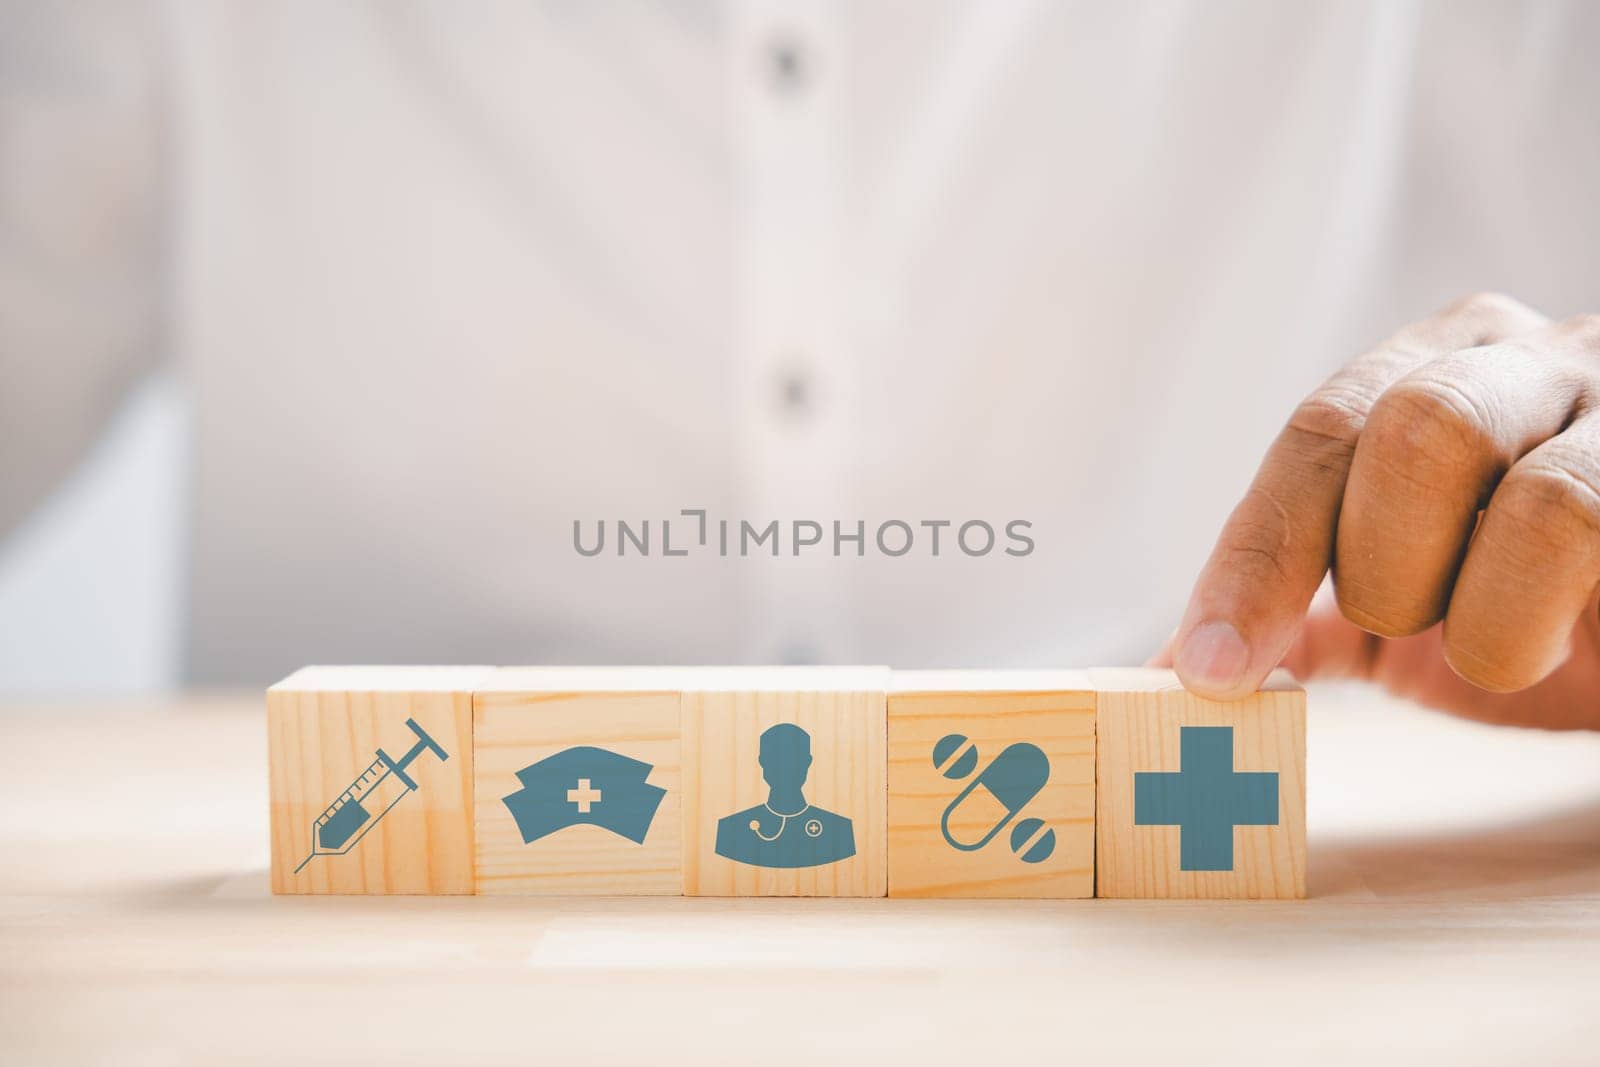 Wooden block held by hand showcases healthcare and medical icons. Portrays safety, health, and family well-being, symbolizing pharmacy, heart care, and happiness. health care concept